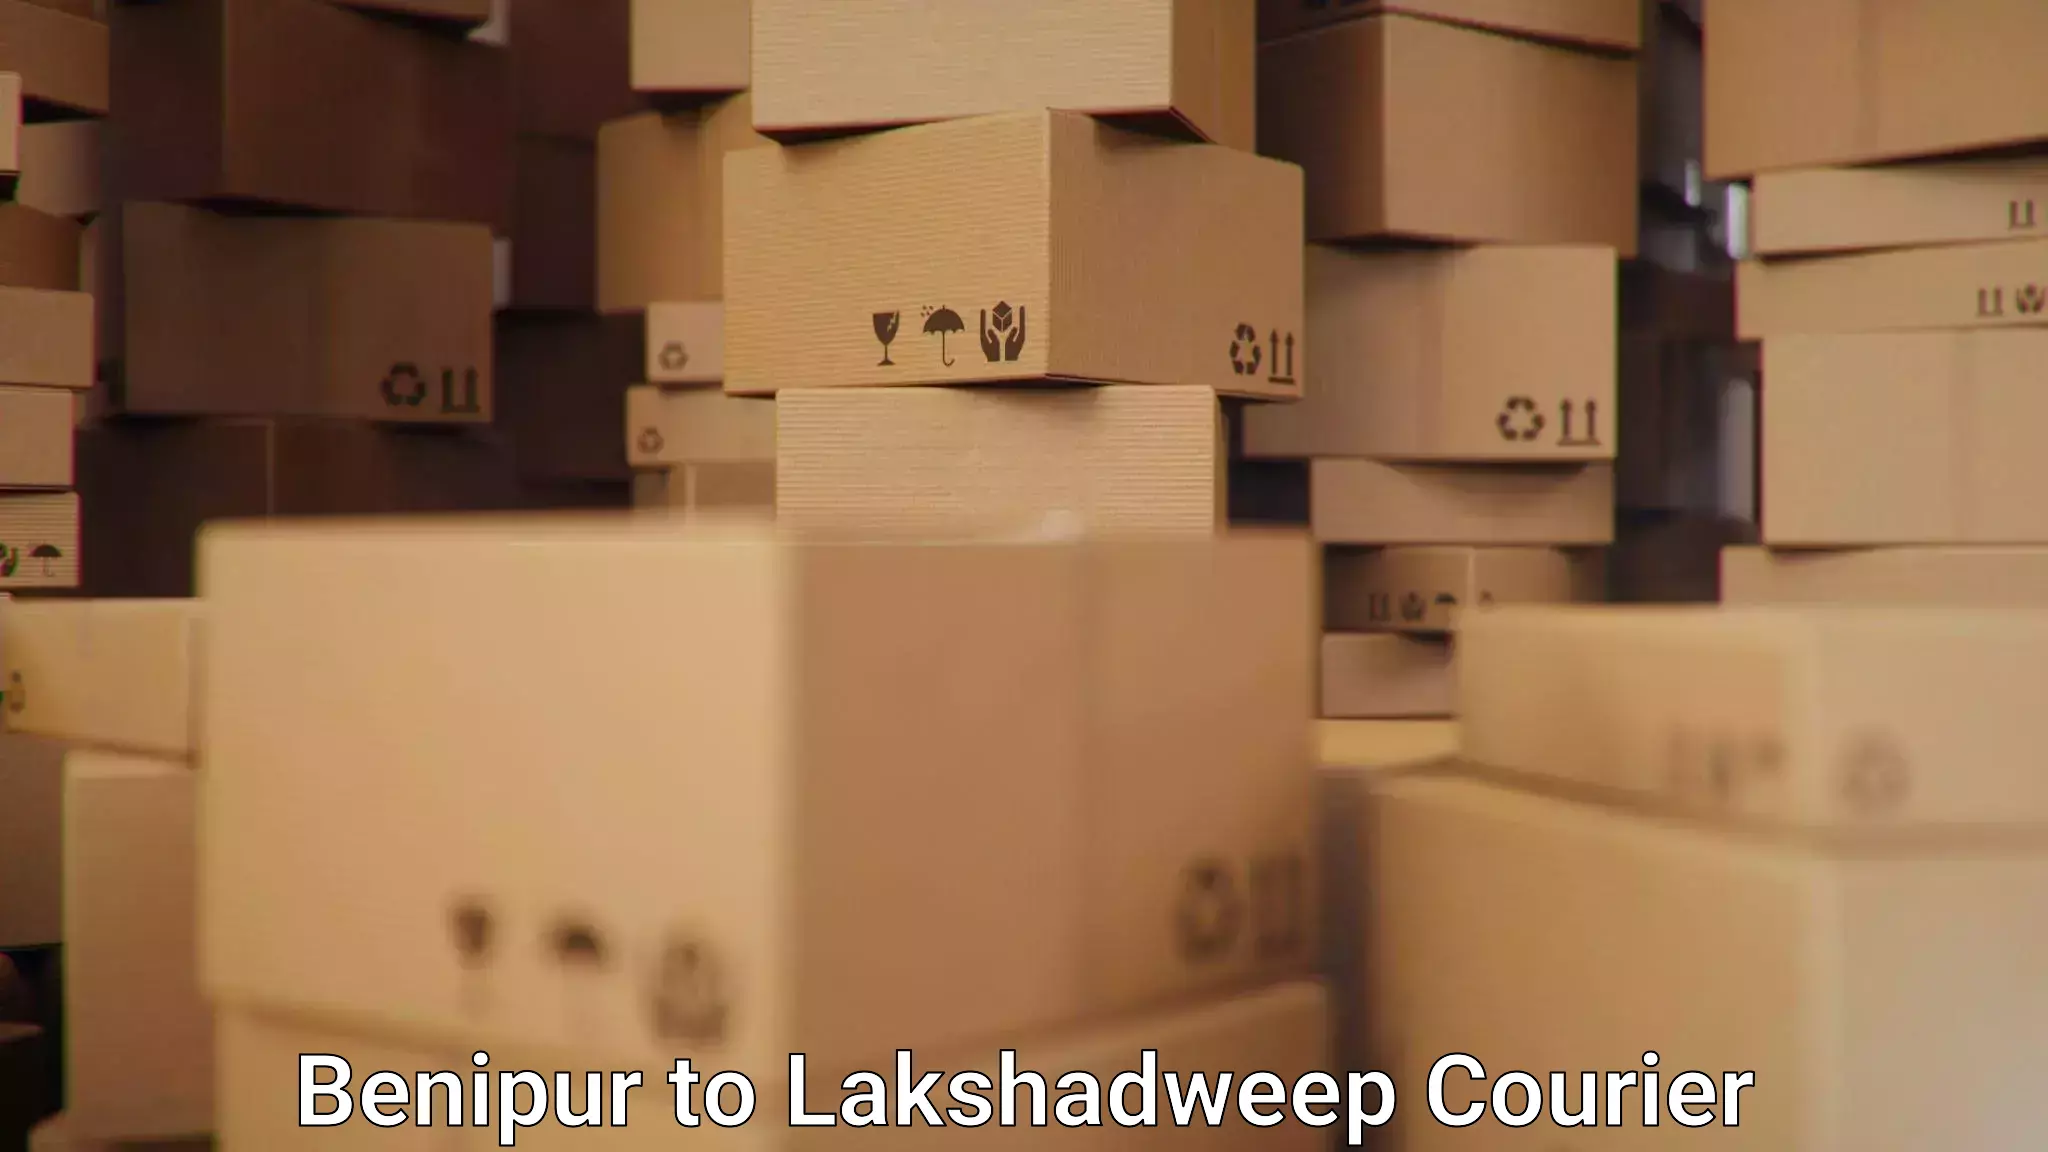 Global courier networks Benipur to Lakshadweep